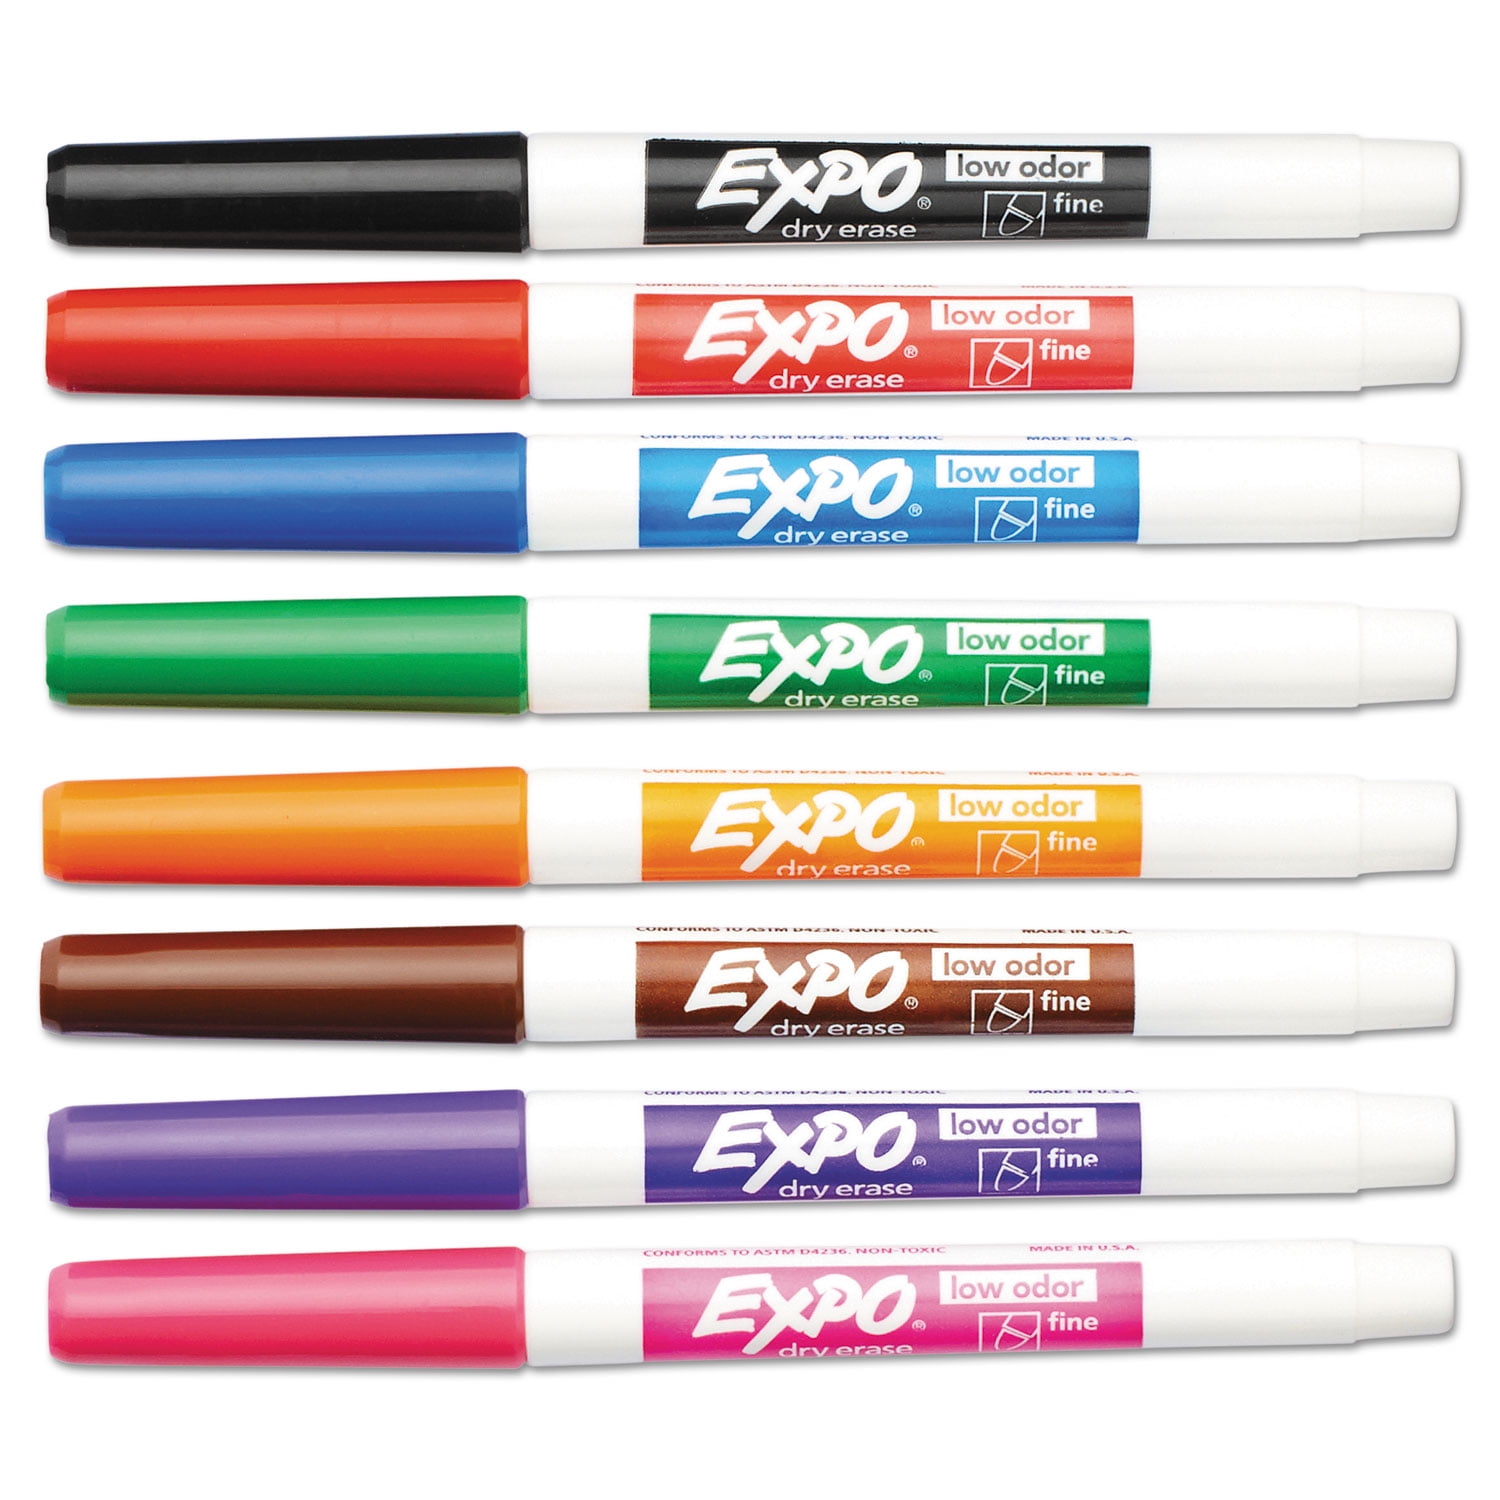 Low-Odor Dry-Erase Marker by EXPO® SAN1871133